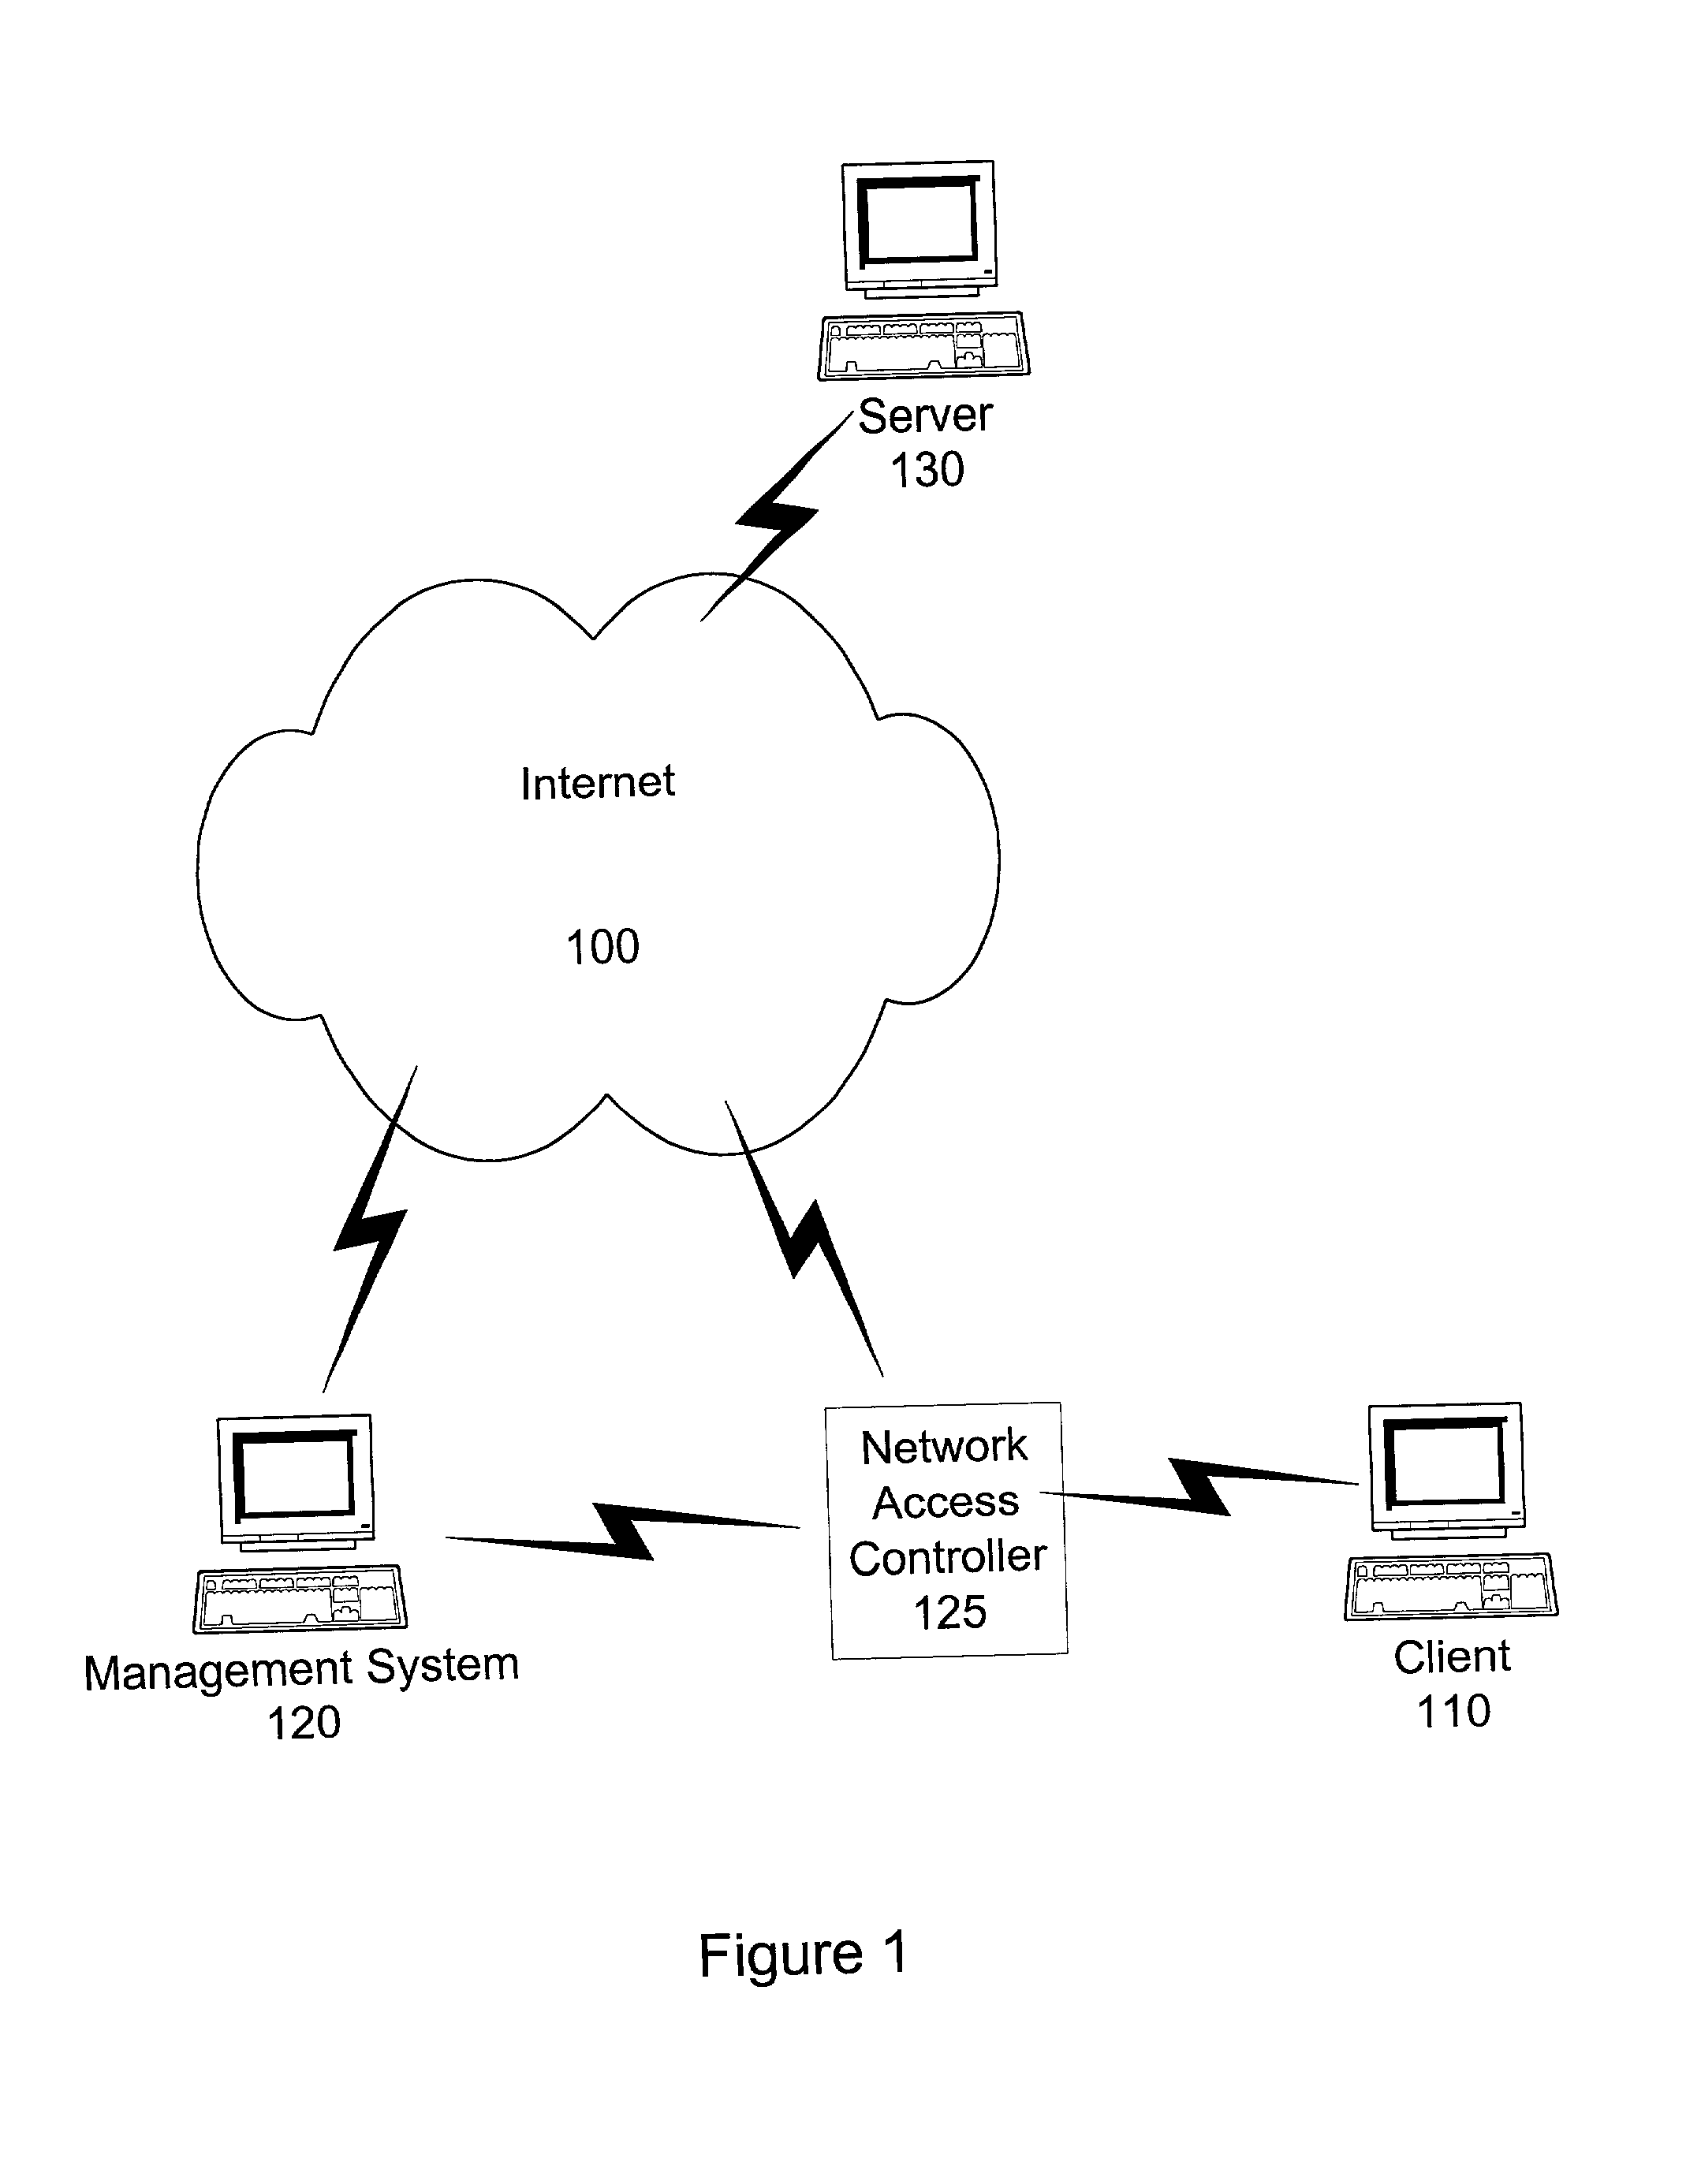 System and method for delivery and usage based billing for data services in telecommunication networks